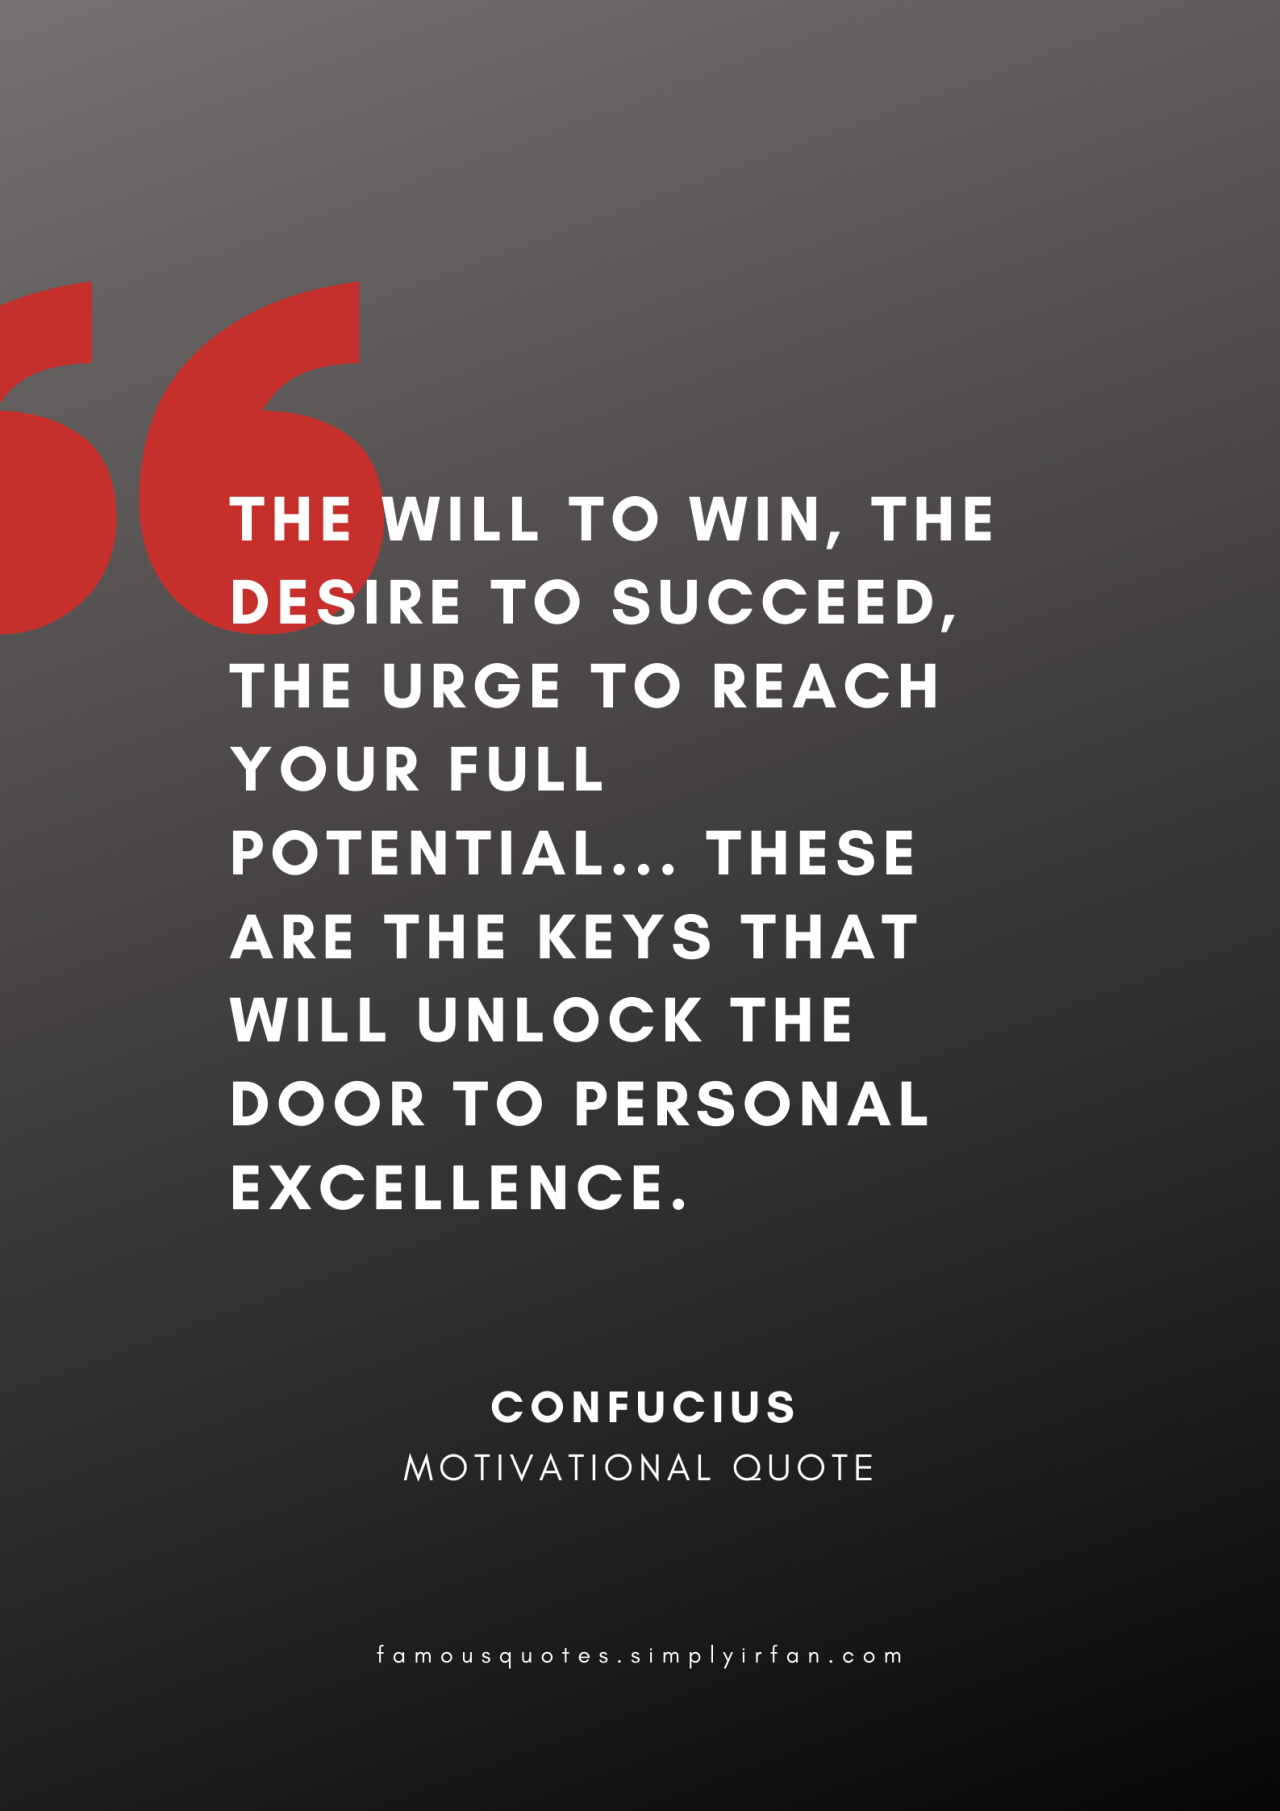 The will to win, the desire to succeed, the urge to reach your full potential… these are the keys that will unlock the door to personal excellence. Quote by Confucius